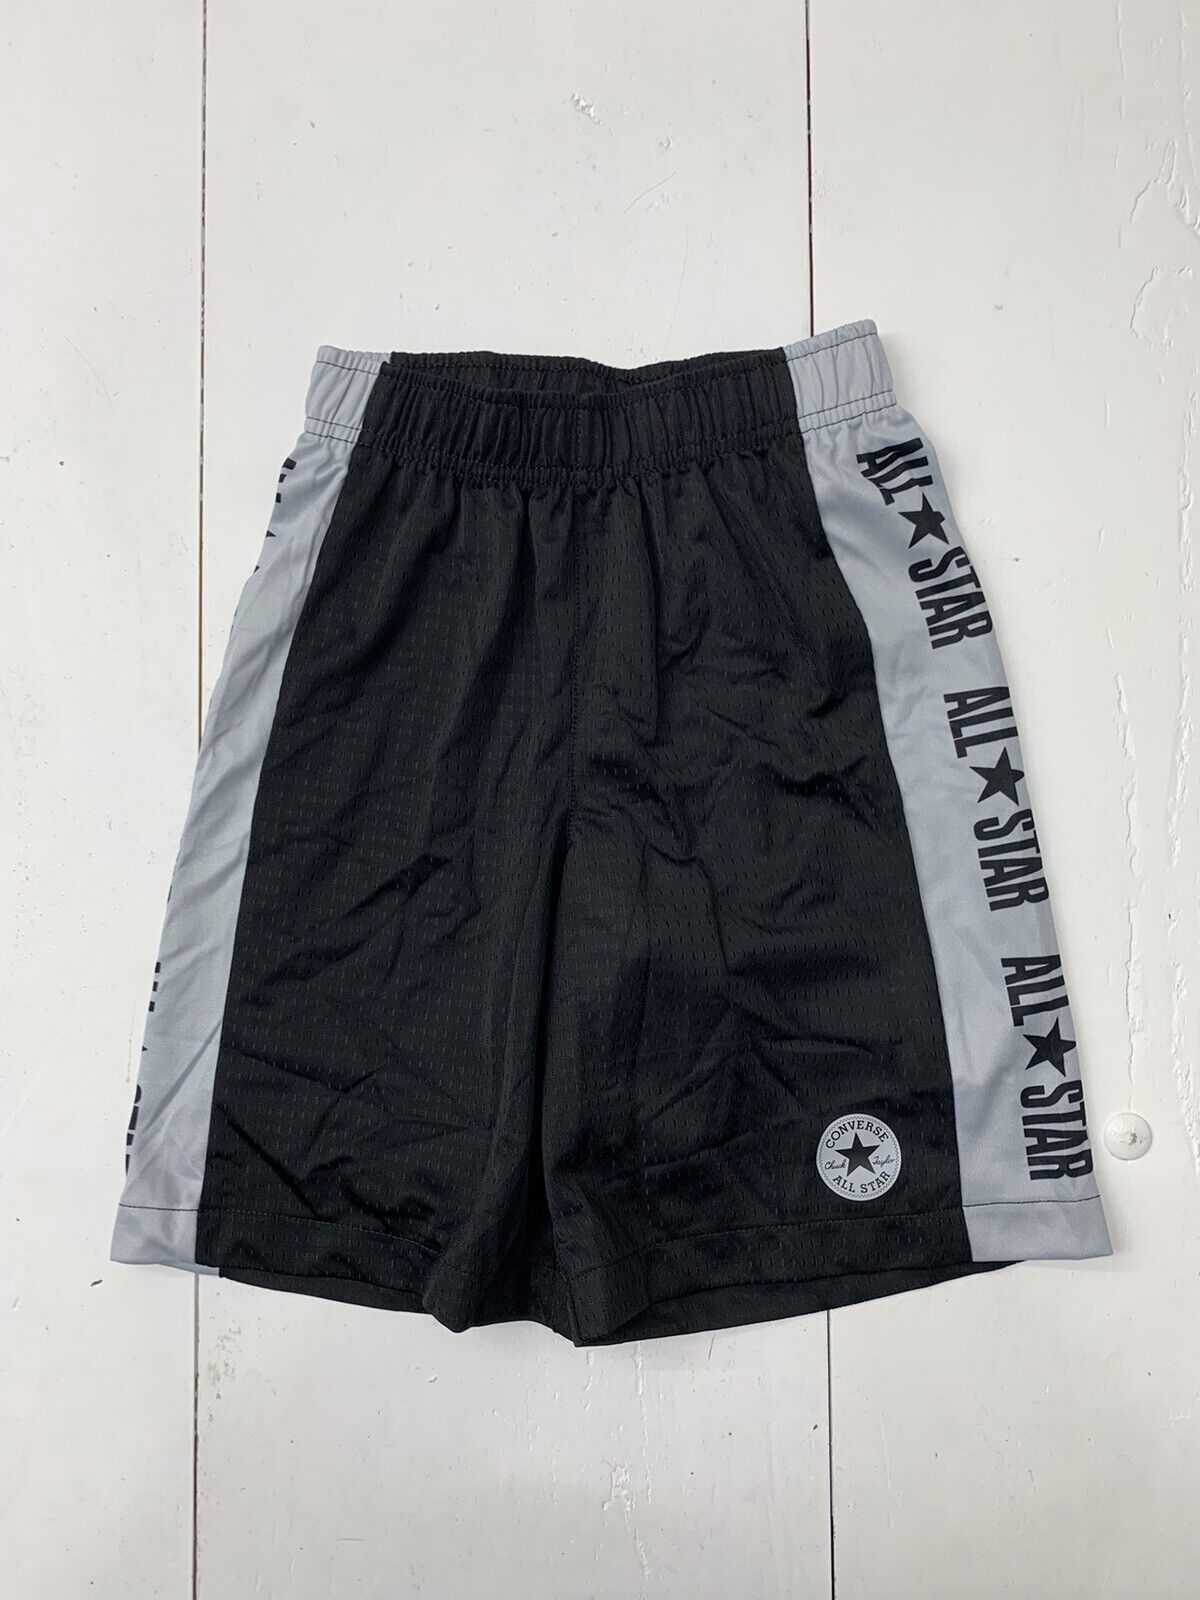 Converse Kids Athletic Black Shorts Size Small - beyond